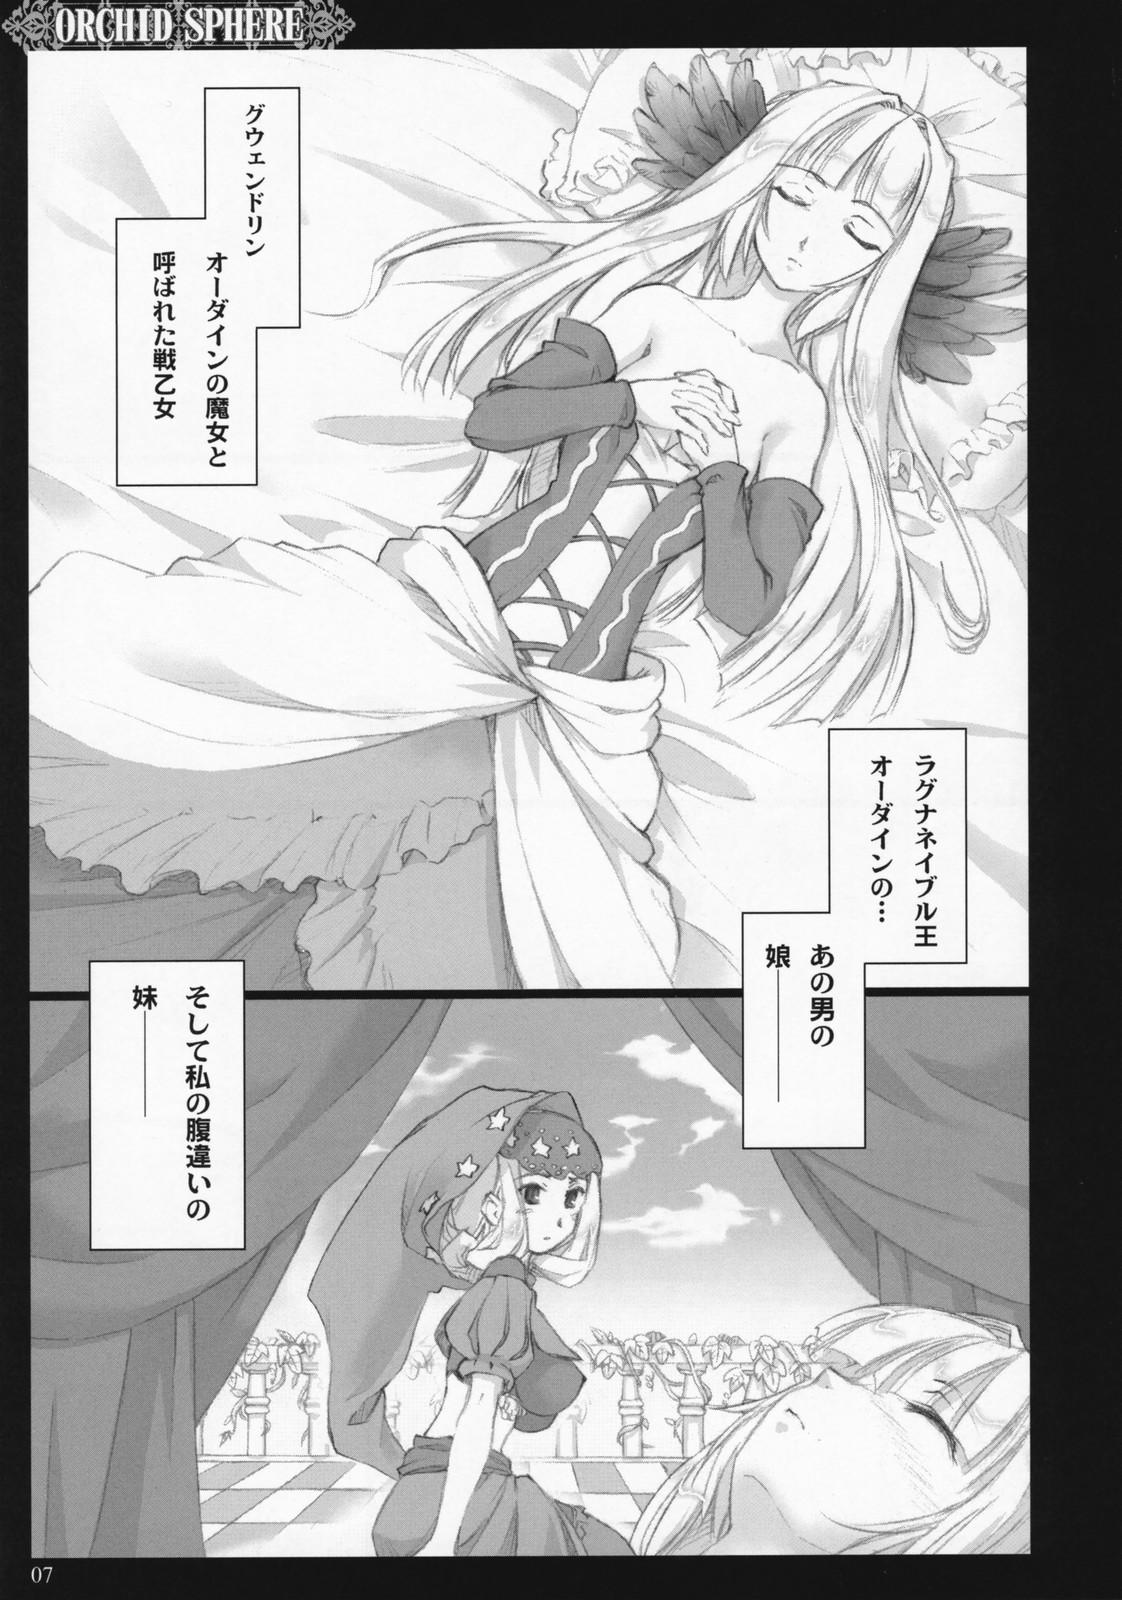 Blow Job Orchid Sphere - Odin sphere Girl - Page 6